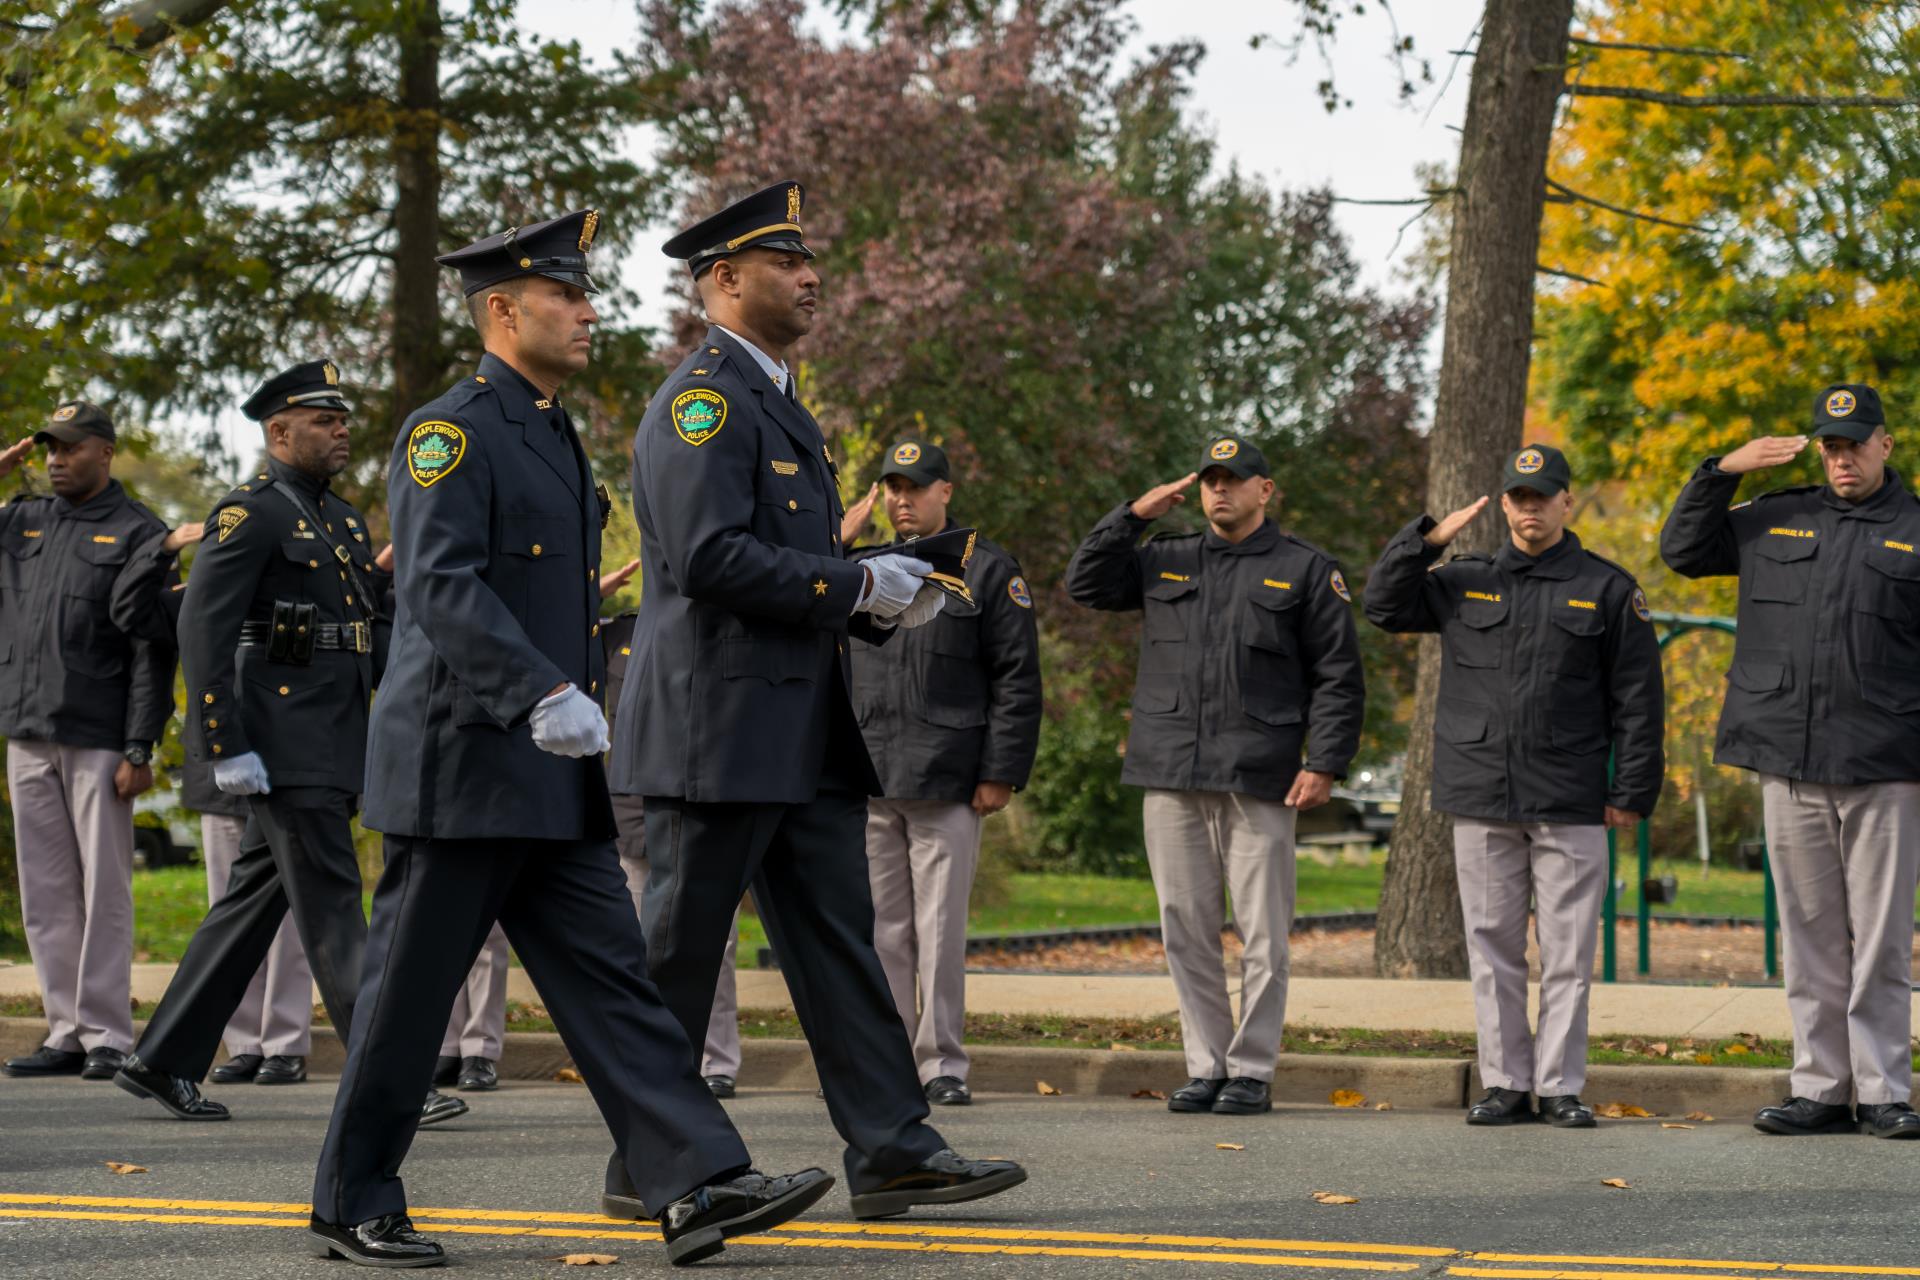 Image of Chief Sally and Det. Baez carrying Chief DeVaul's cap in his funeral procession.